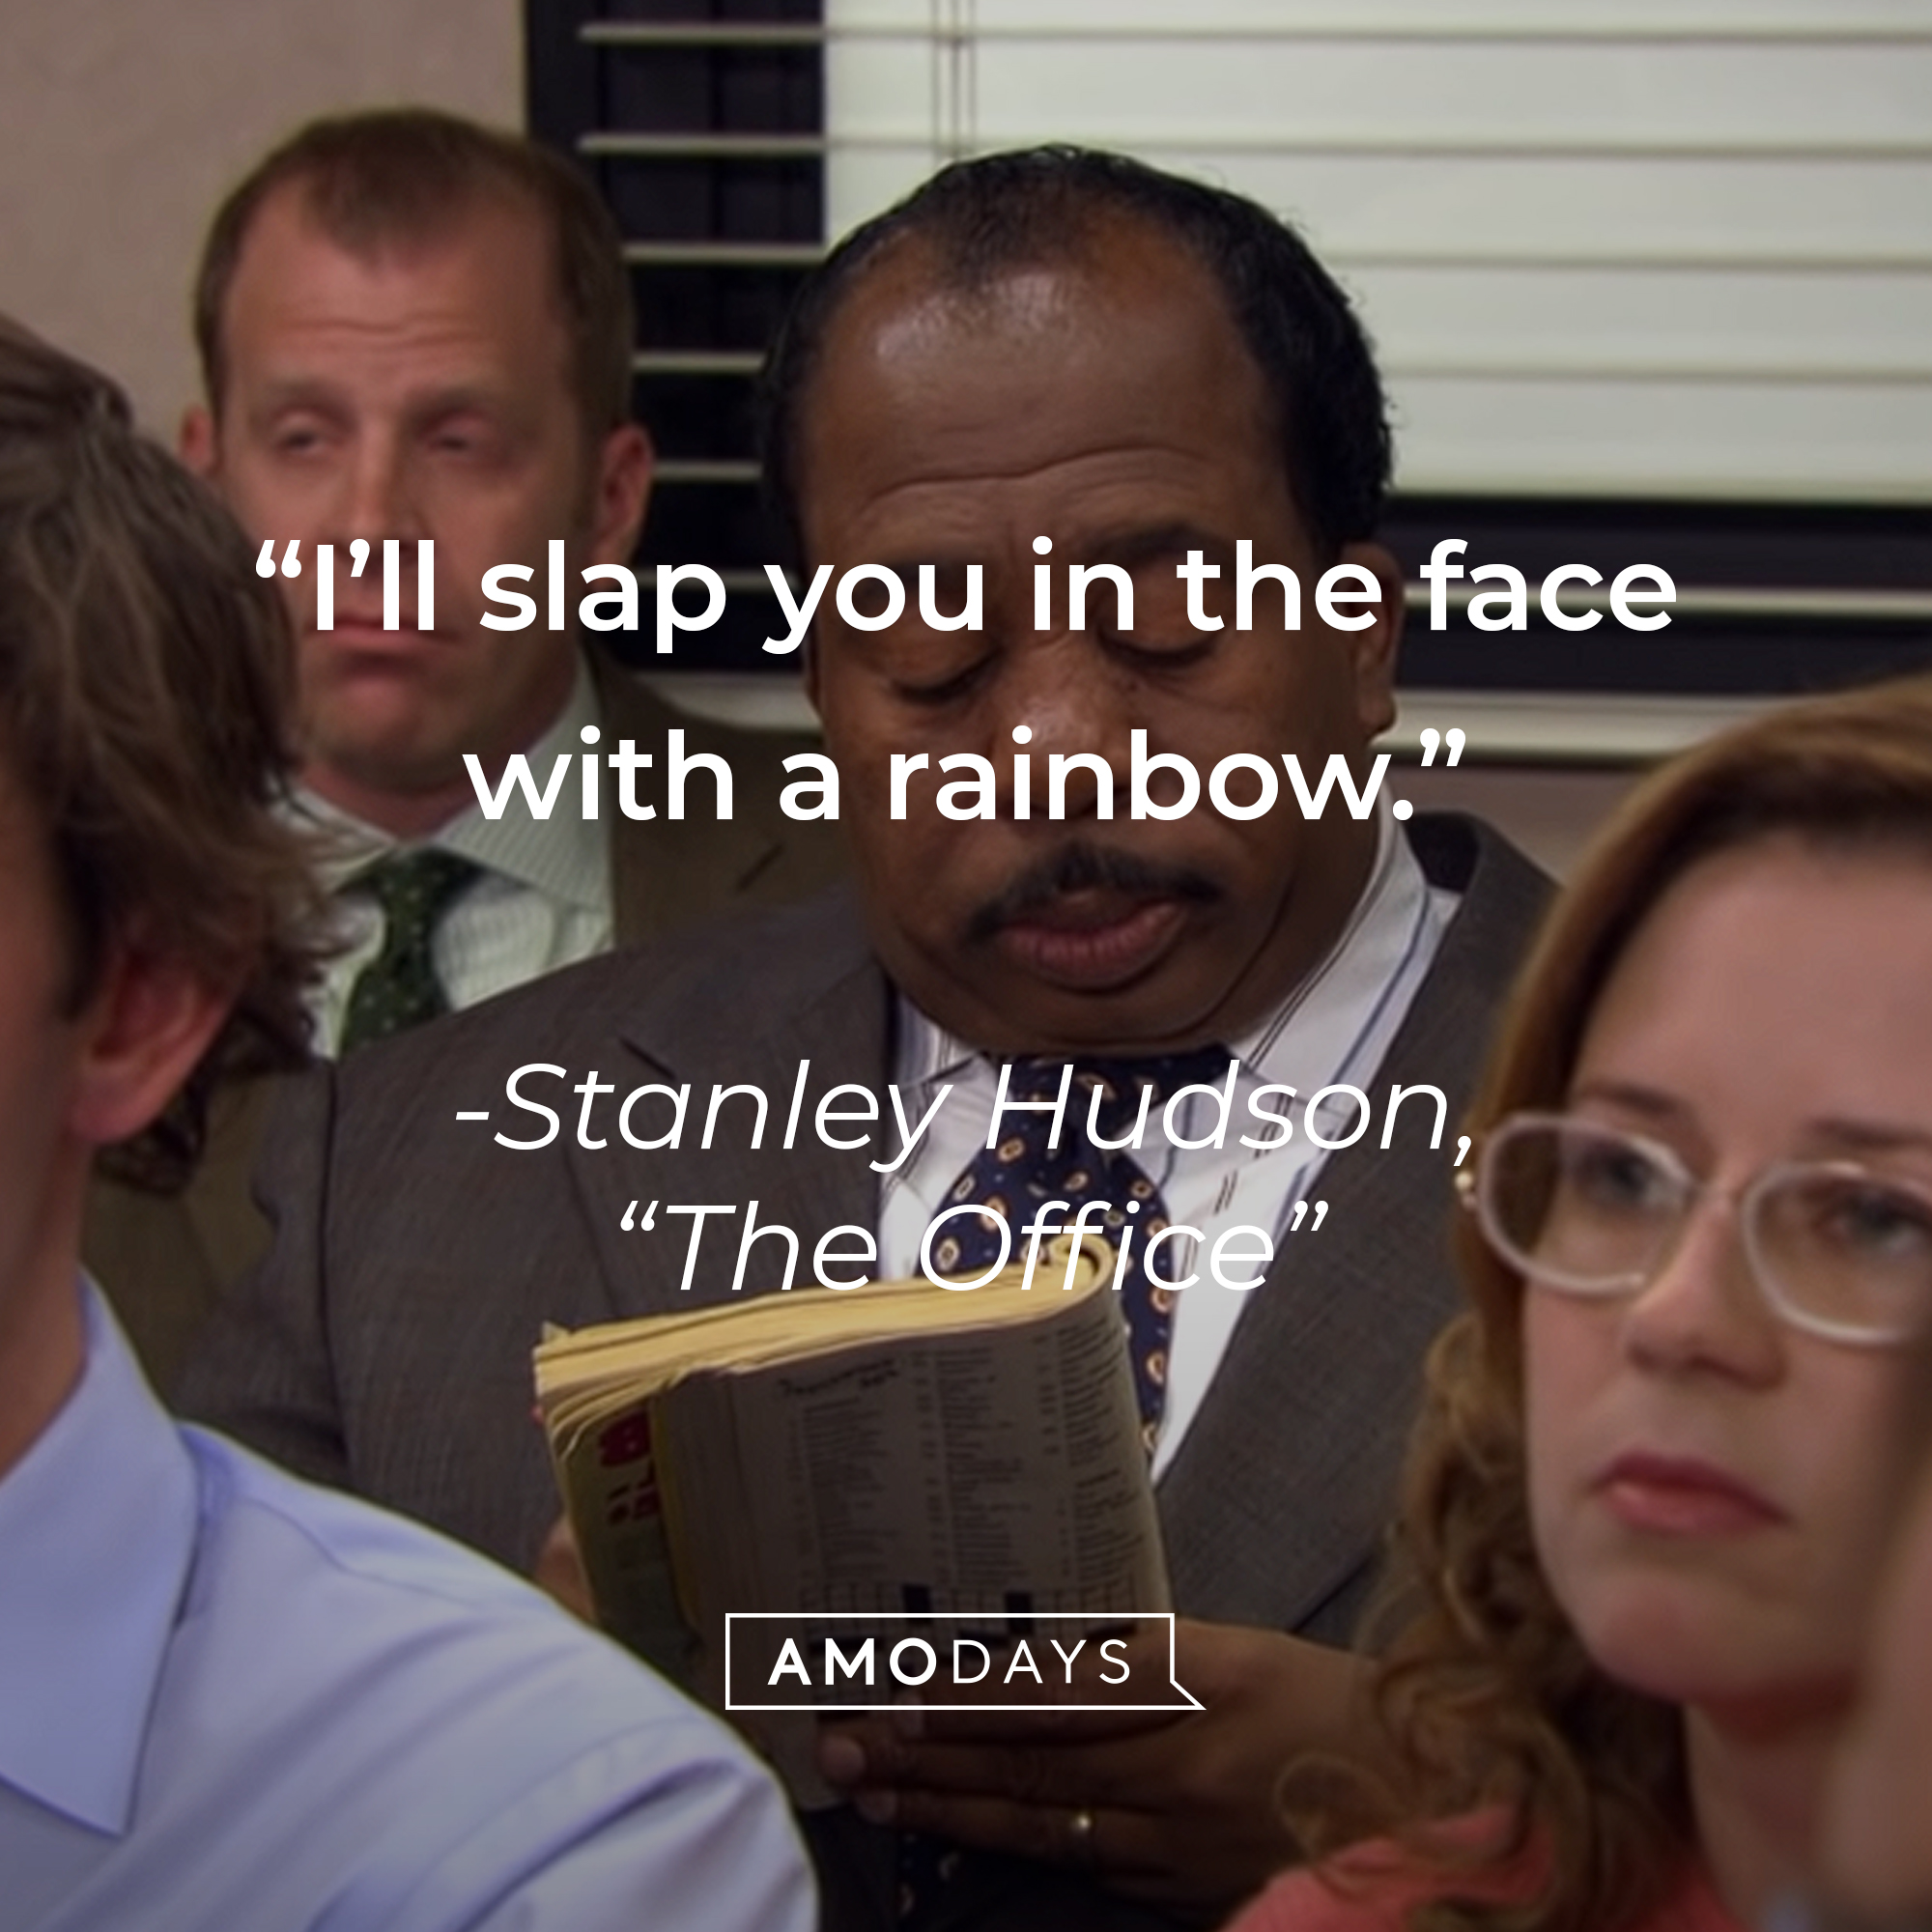 An image of Leslie David Baker as Stanley Hudson in "The Office" with the quote: "I’ll slap you in the face with a rainbow." | Source: youtube.com/The Office